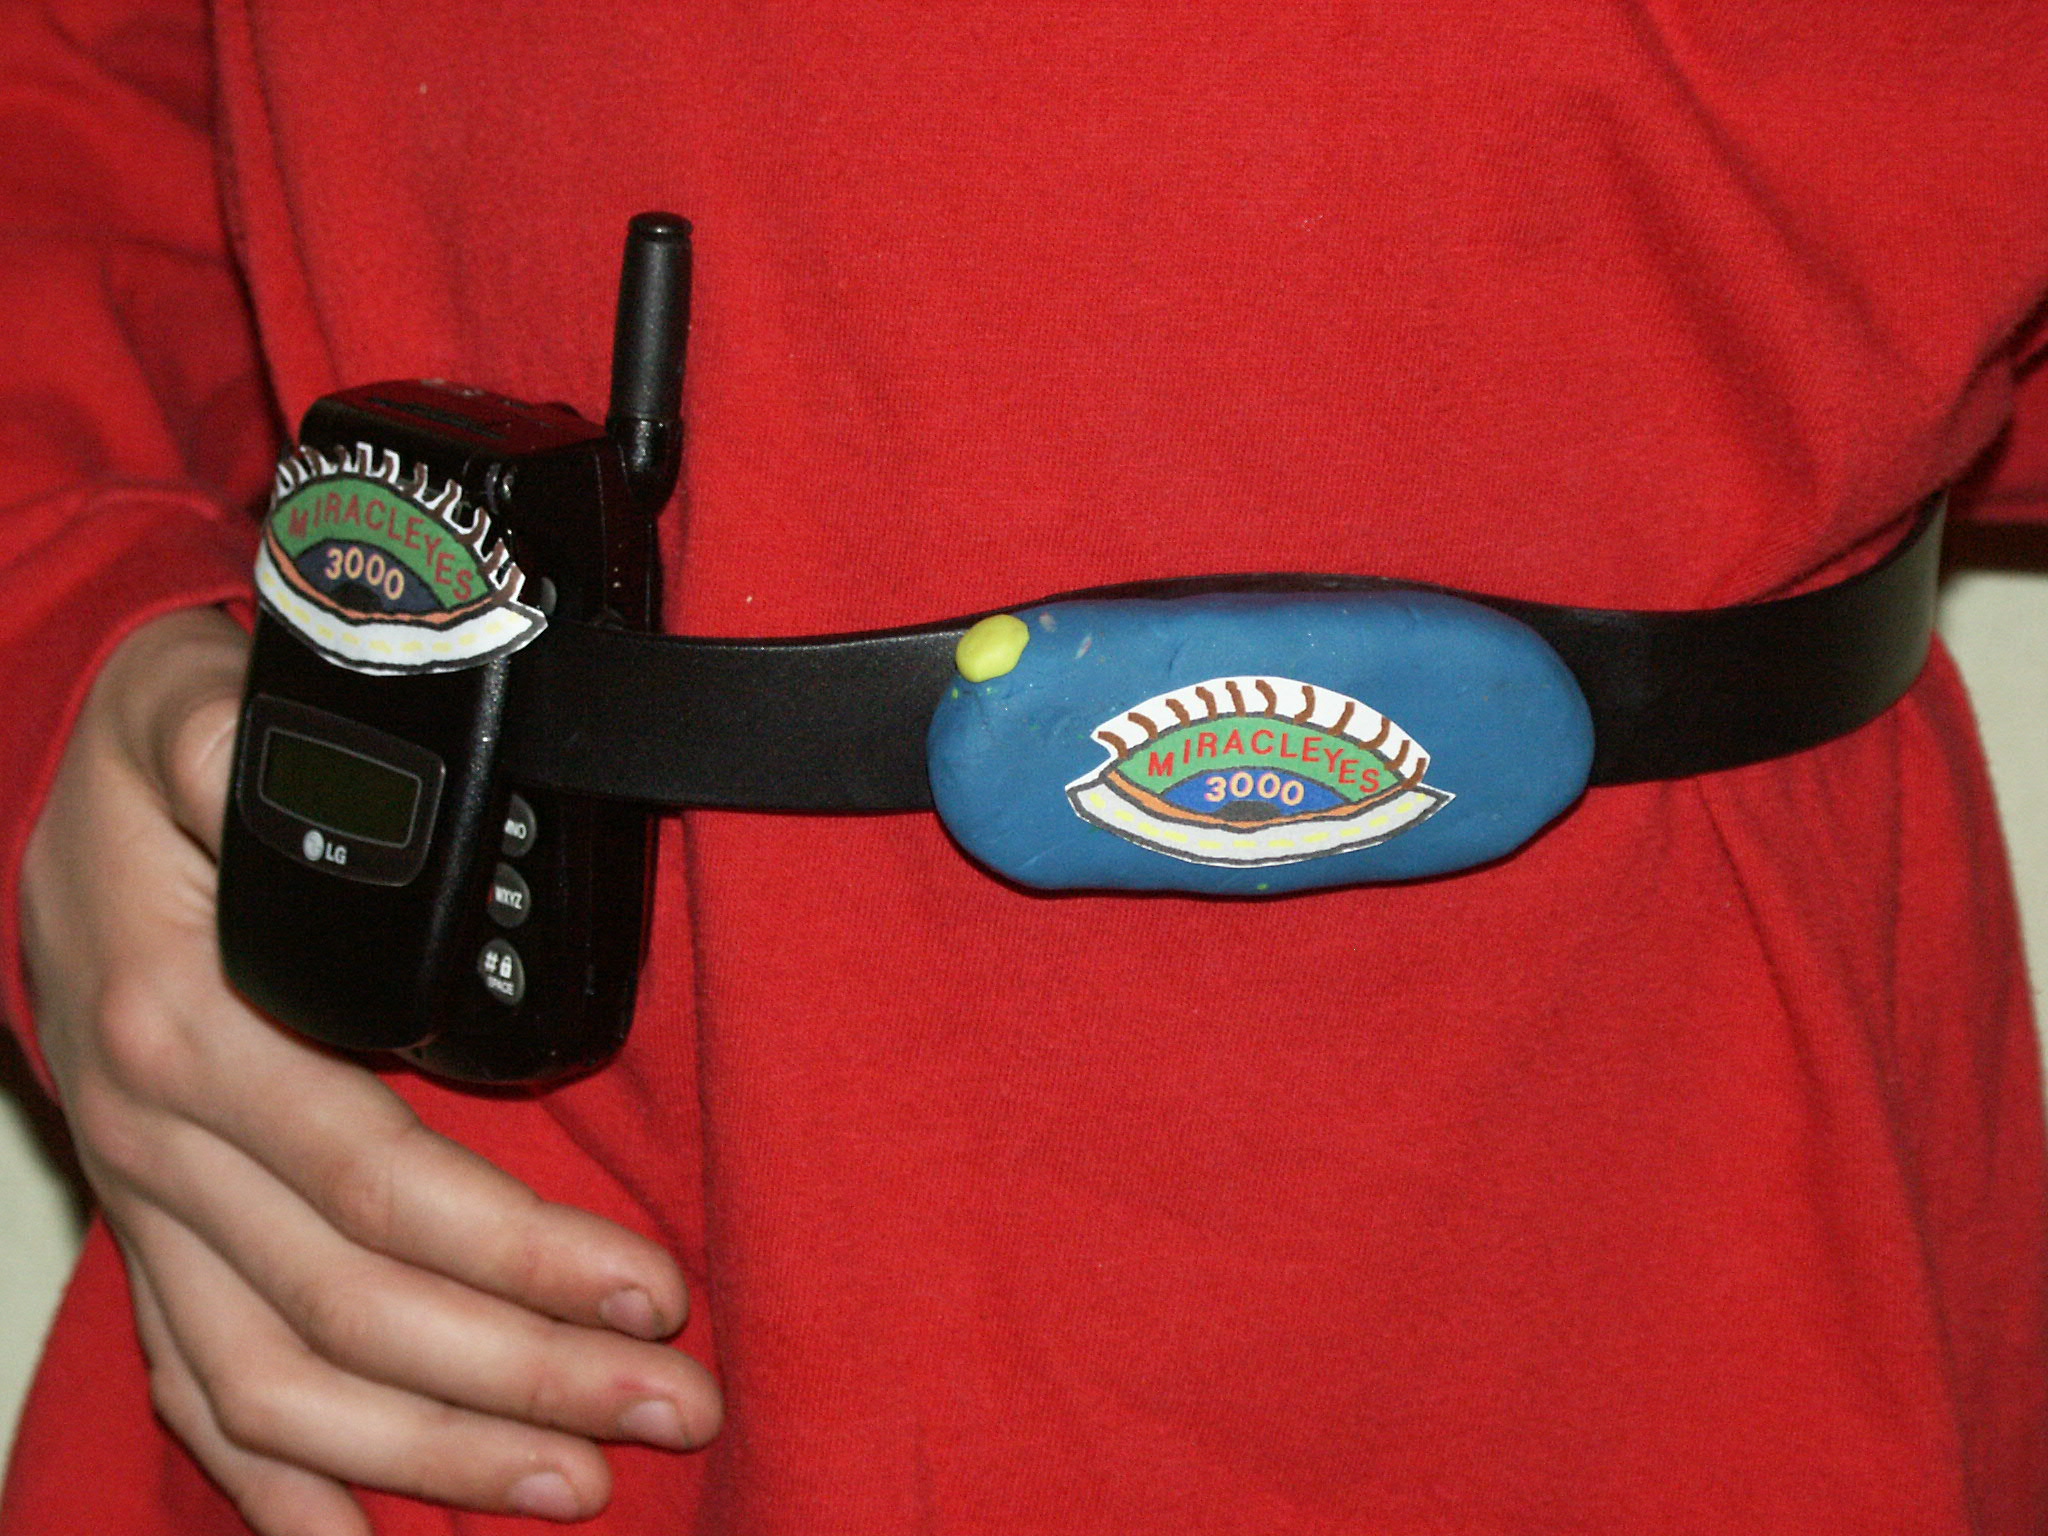 Photo of MiraclEyes belt and cell phone on user's waist.